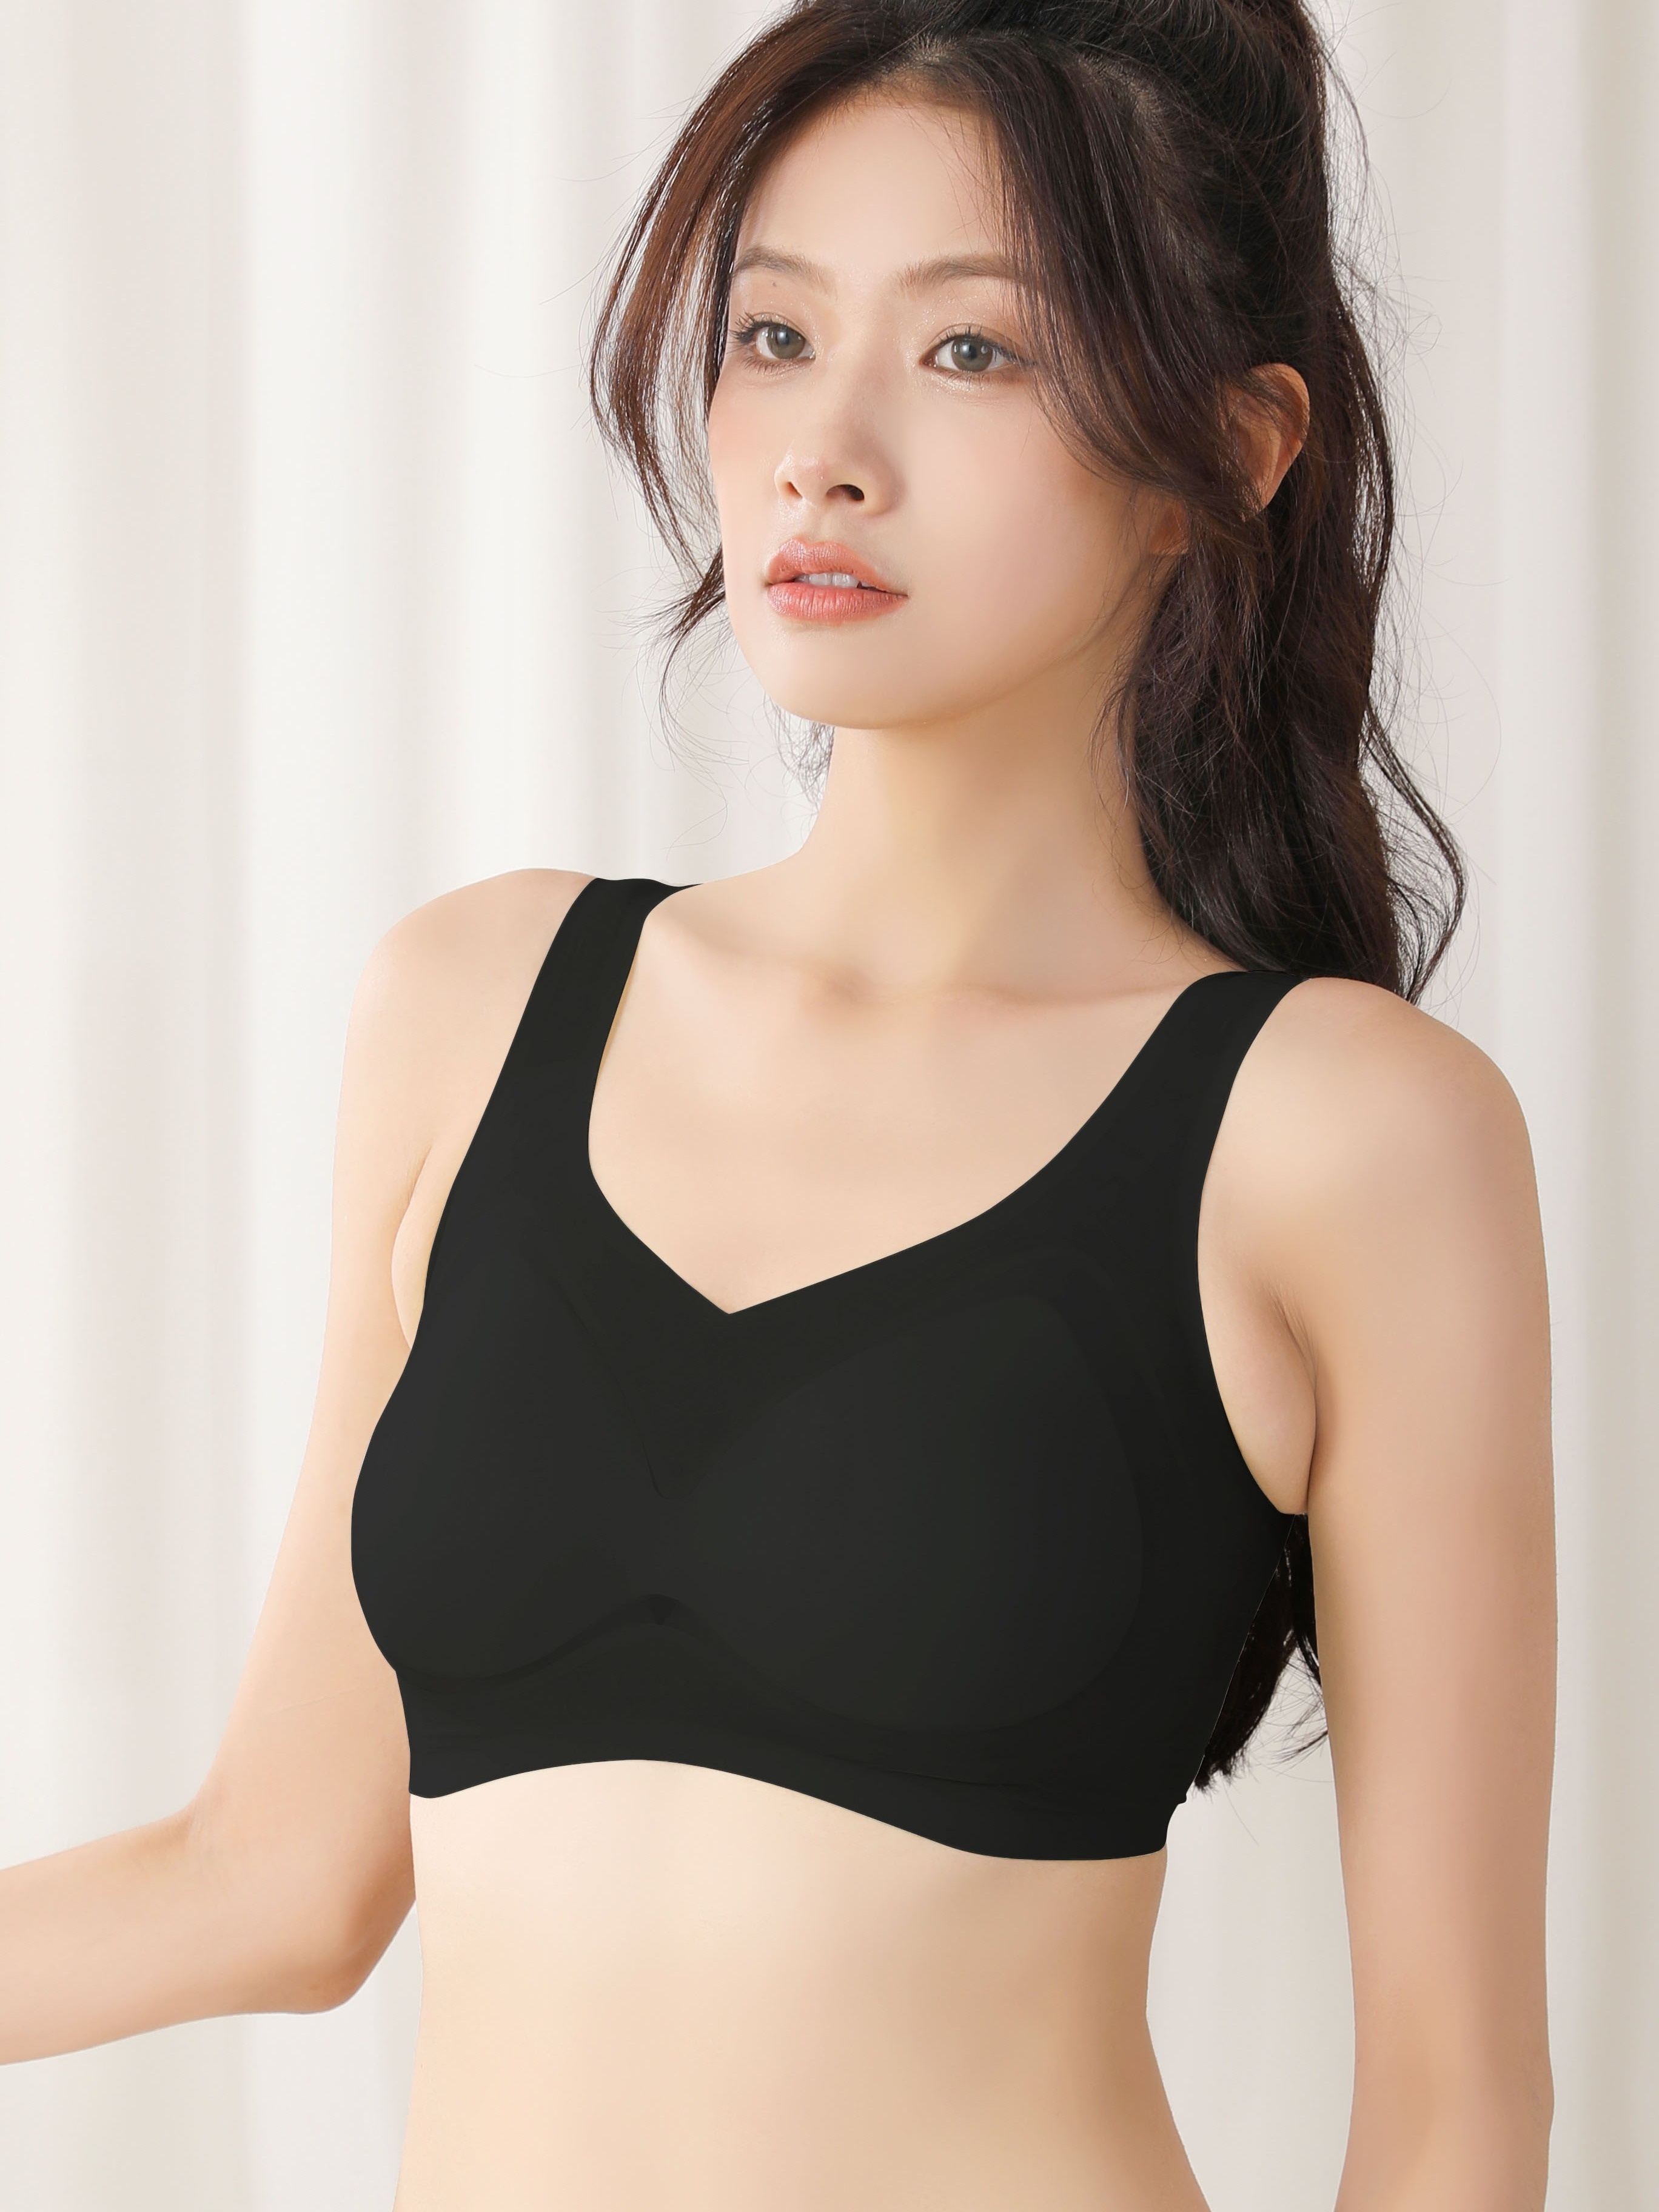 Muses Mall Thin Bra Comfortable Stylish Women's Seamless Bra Wireless  Breathable Push Up Perfect for Southeast Asian Buyers